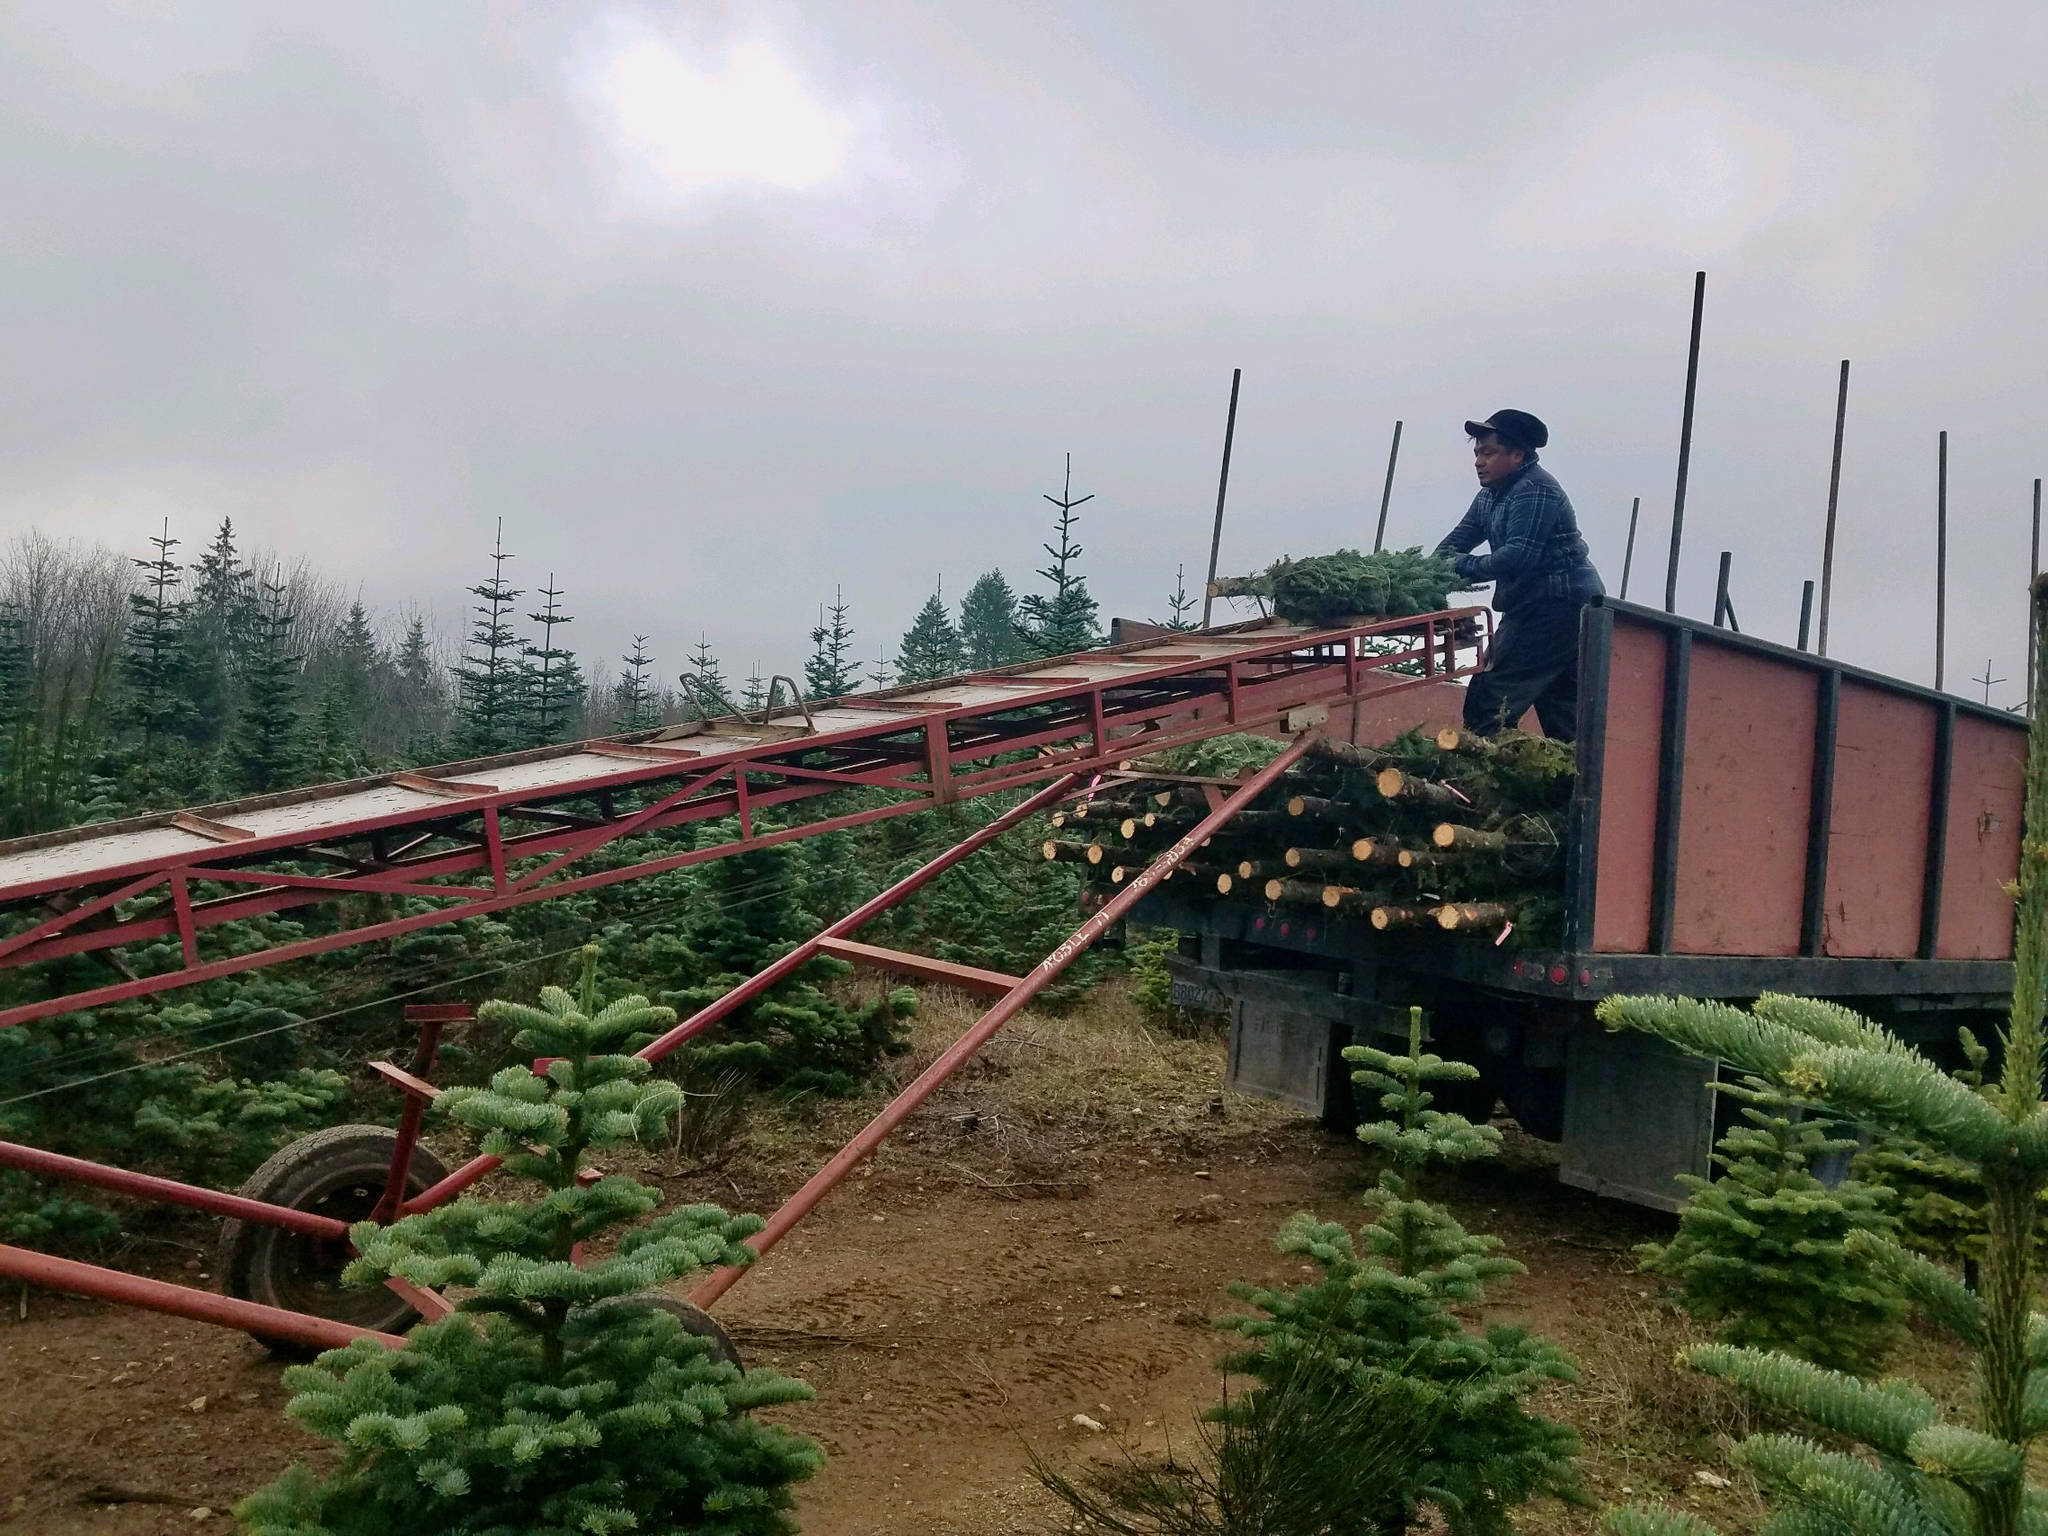 Loading up the pre-cut trees to transport to various locations in Kitsap County. Courtesy Olmstead Tree Farms.